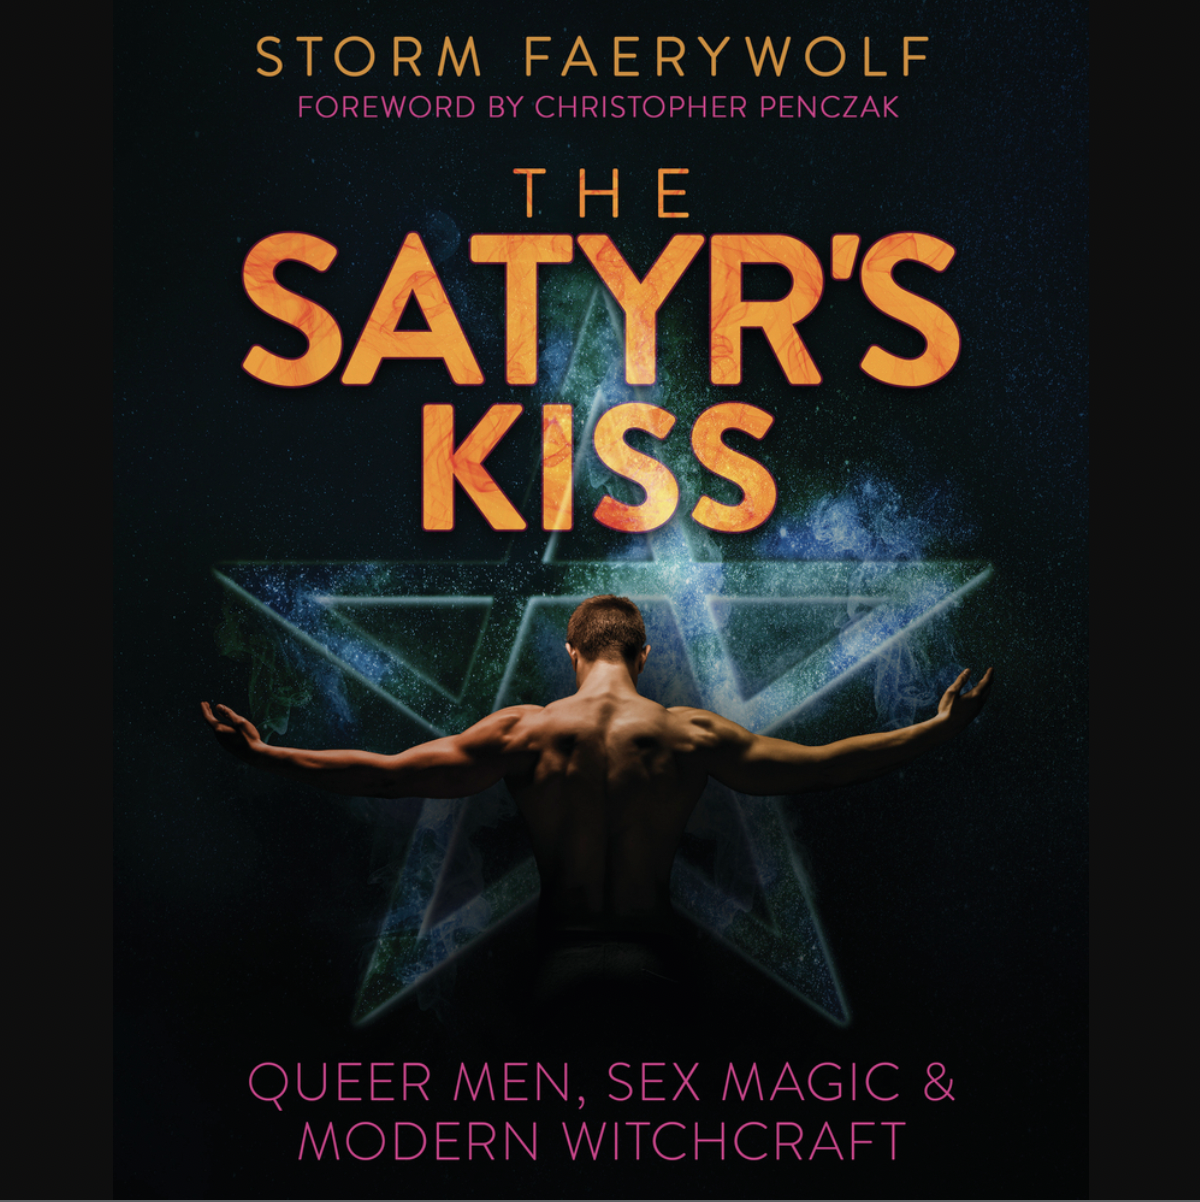 The Satyr's Kiss Queer Men, Sex Magic and Modern Witchcraft by Storm Faerywolf